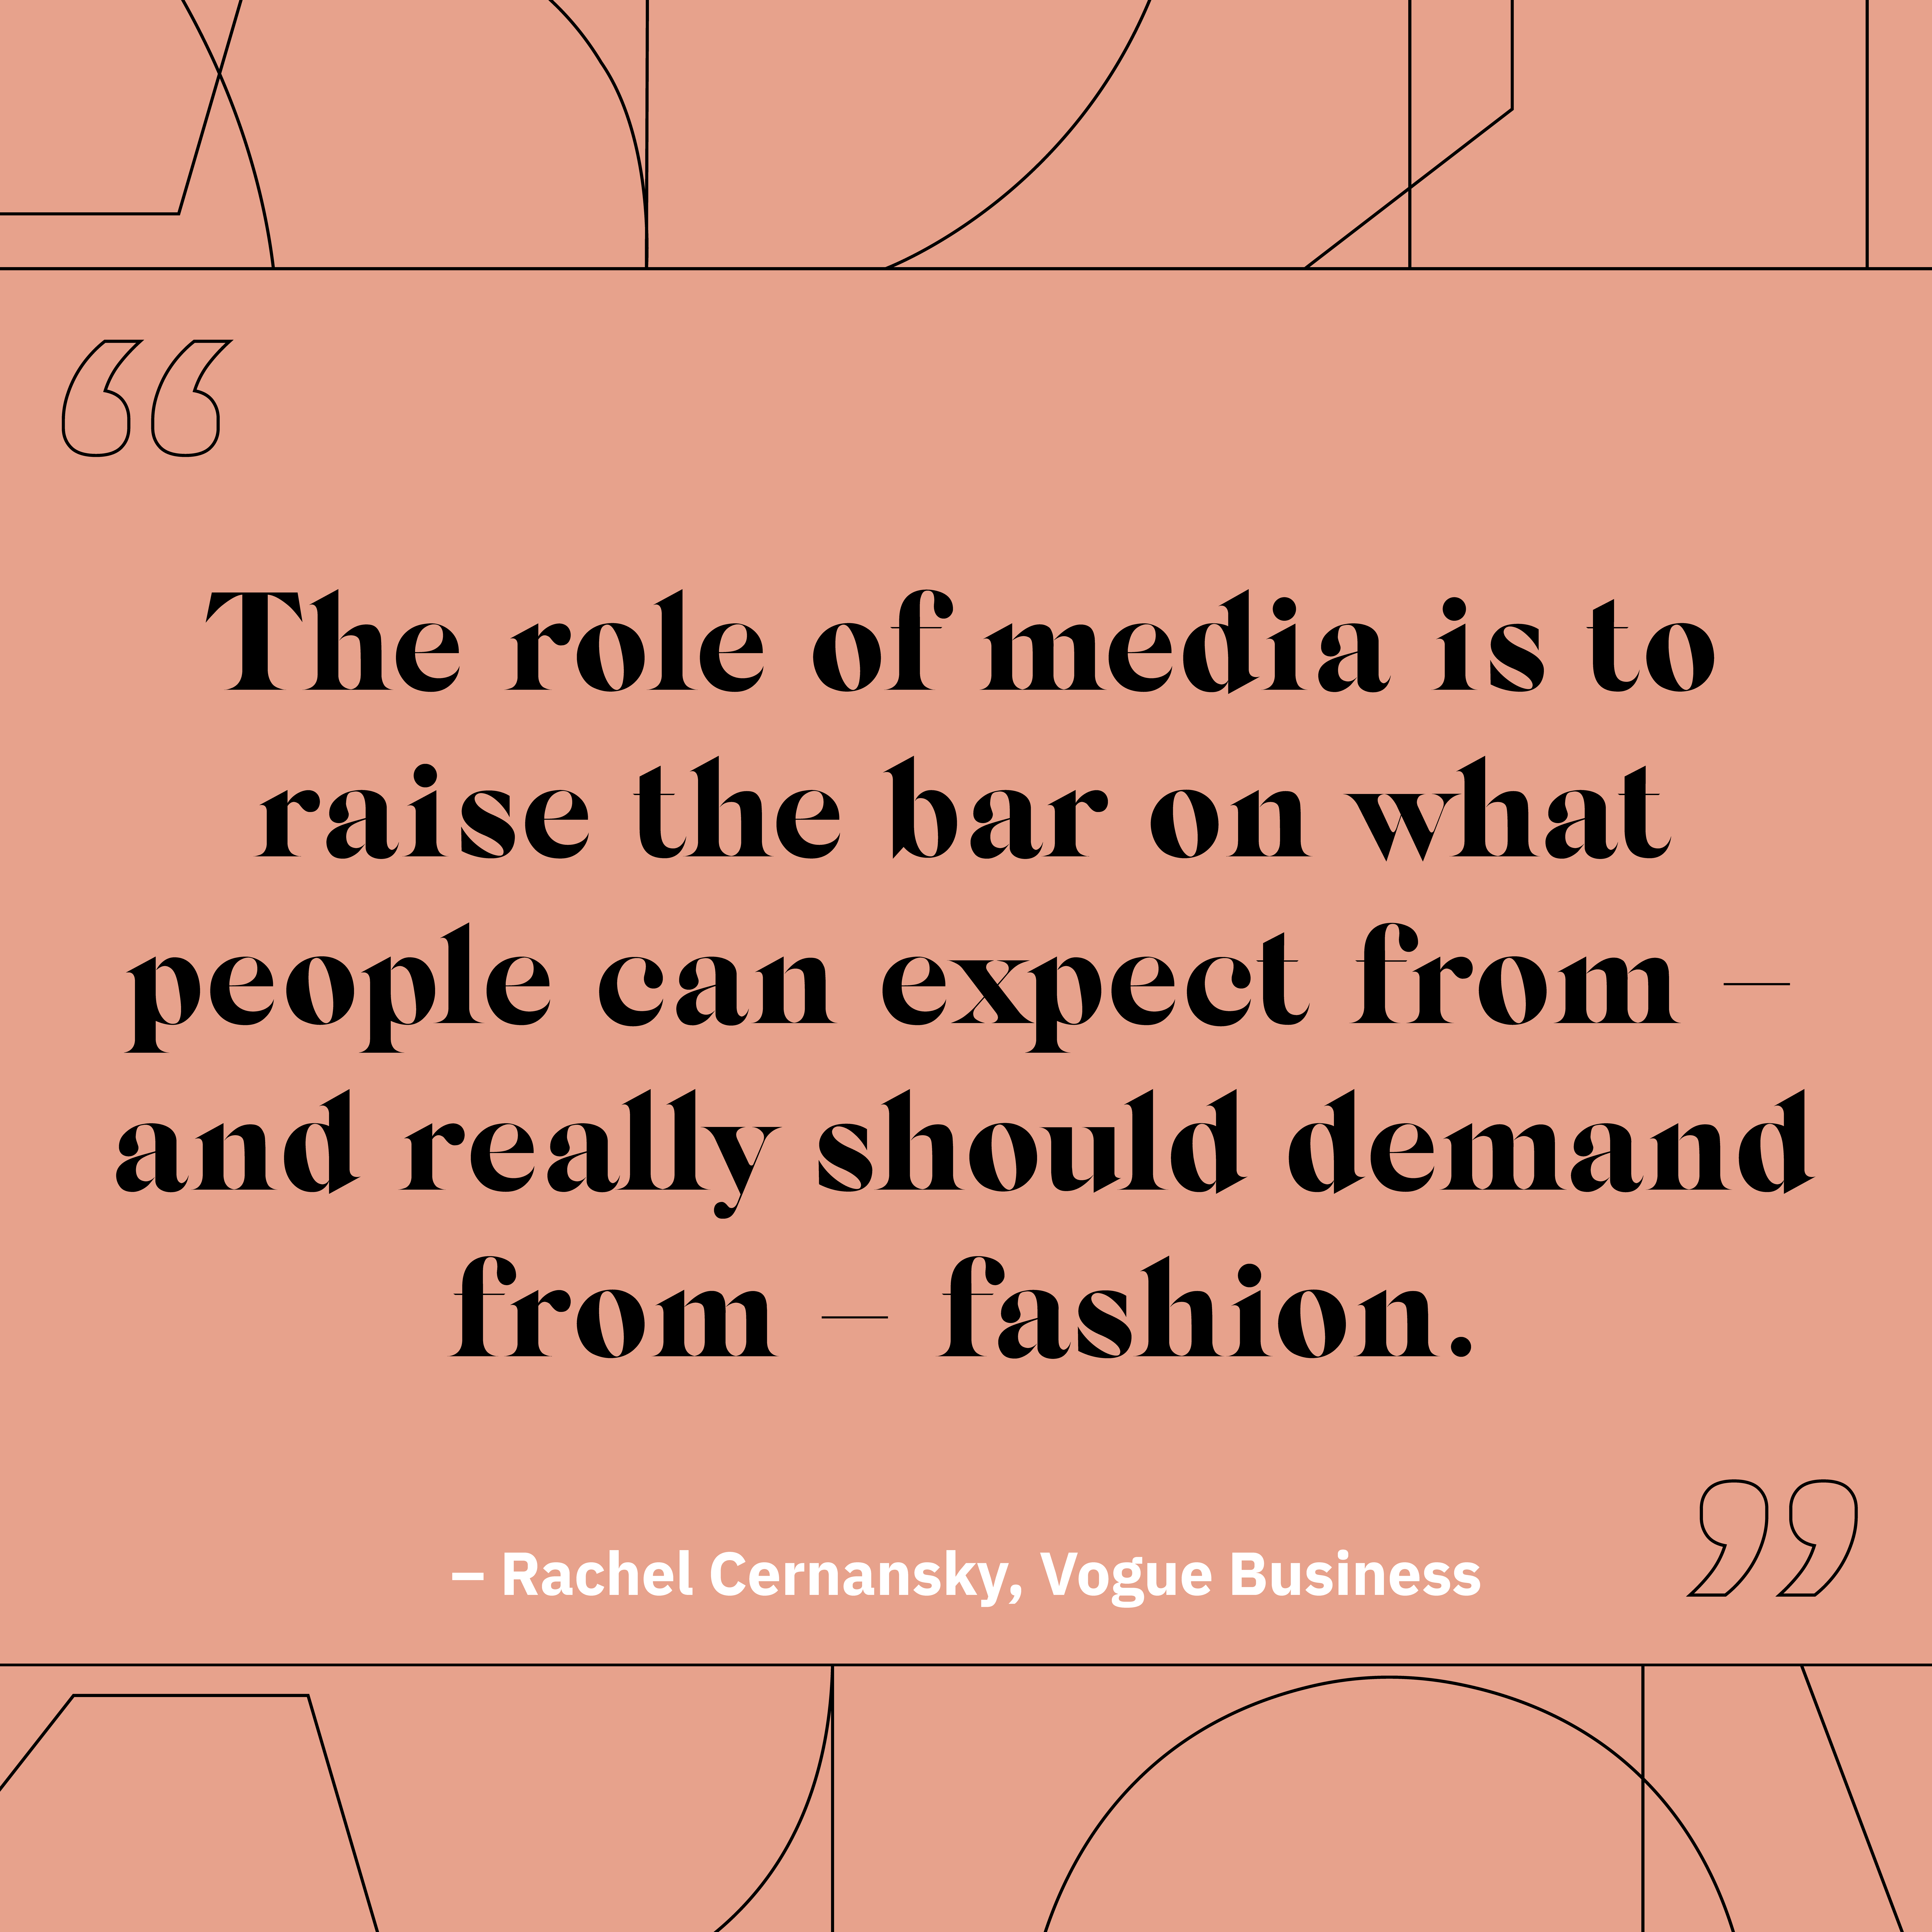 “The role of media is to raise the bar on what people can expect from – and really should demand from – fashion.”  – Rachel Cernansky, Vogue Business 